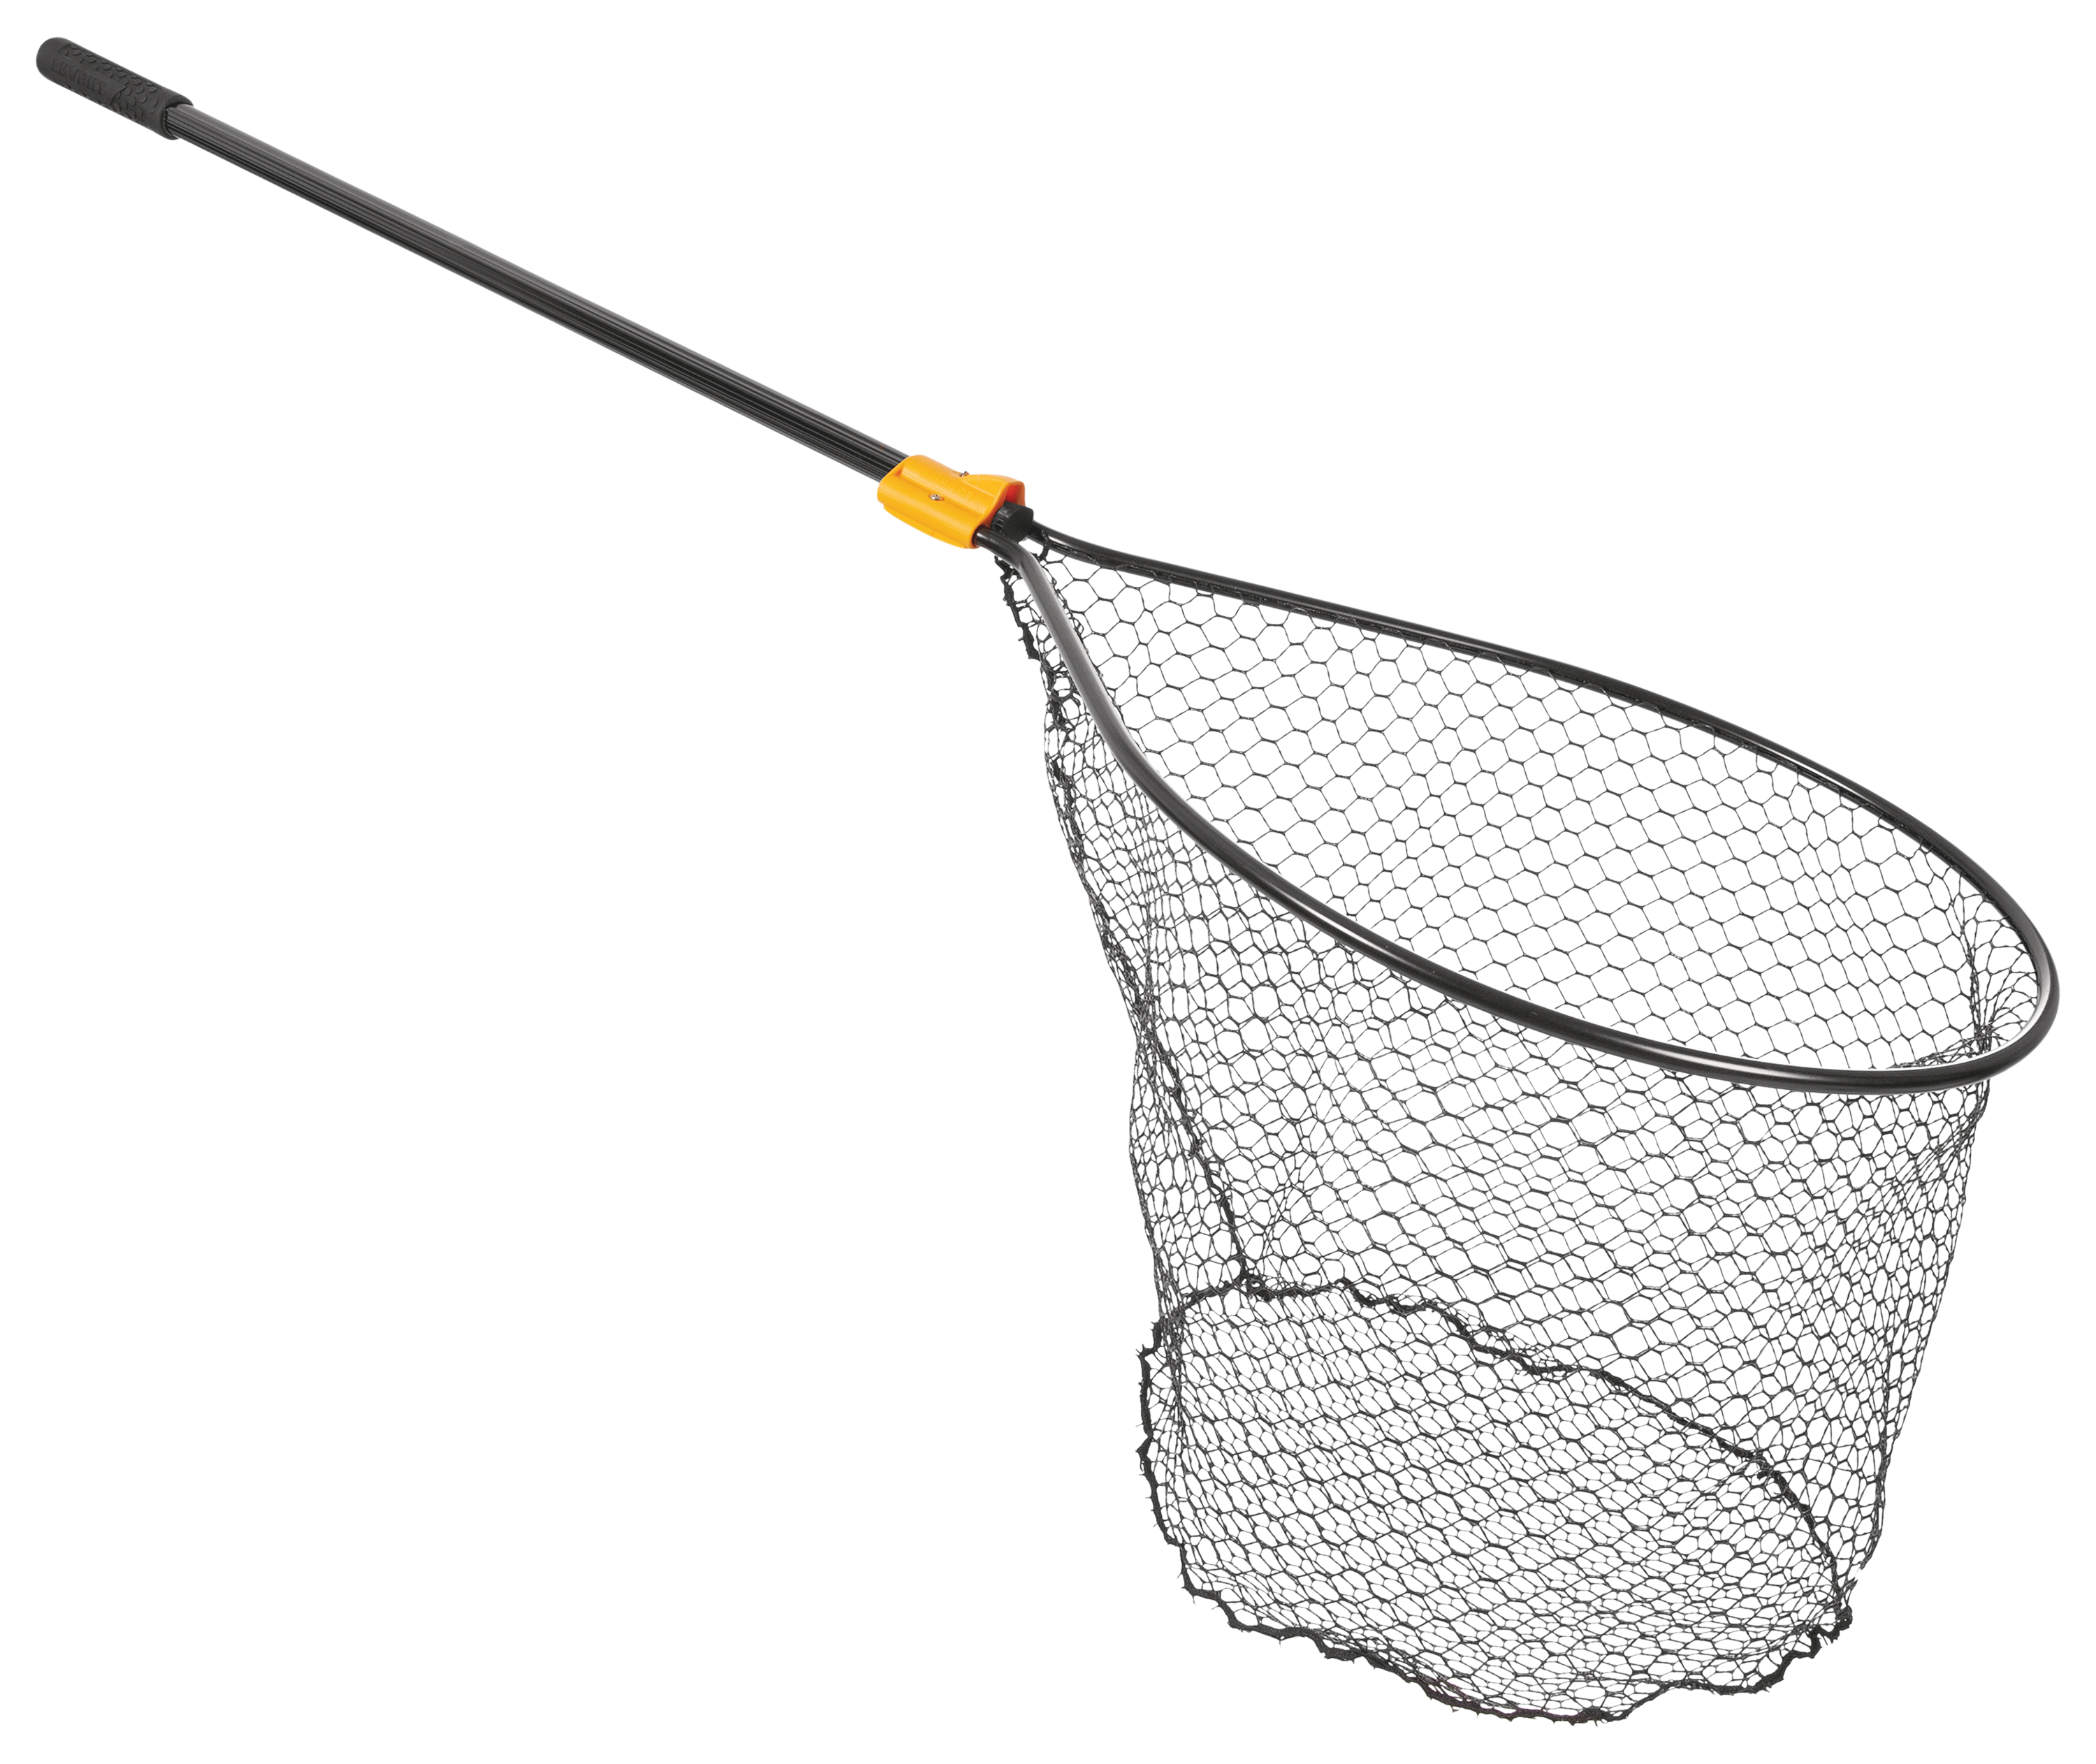 Frabill Wooden Fly Fishing Net Black Mesh Support Catch & Release